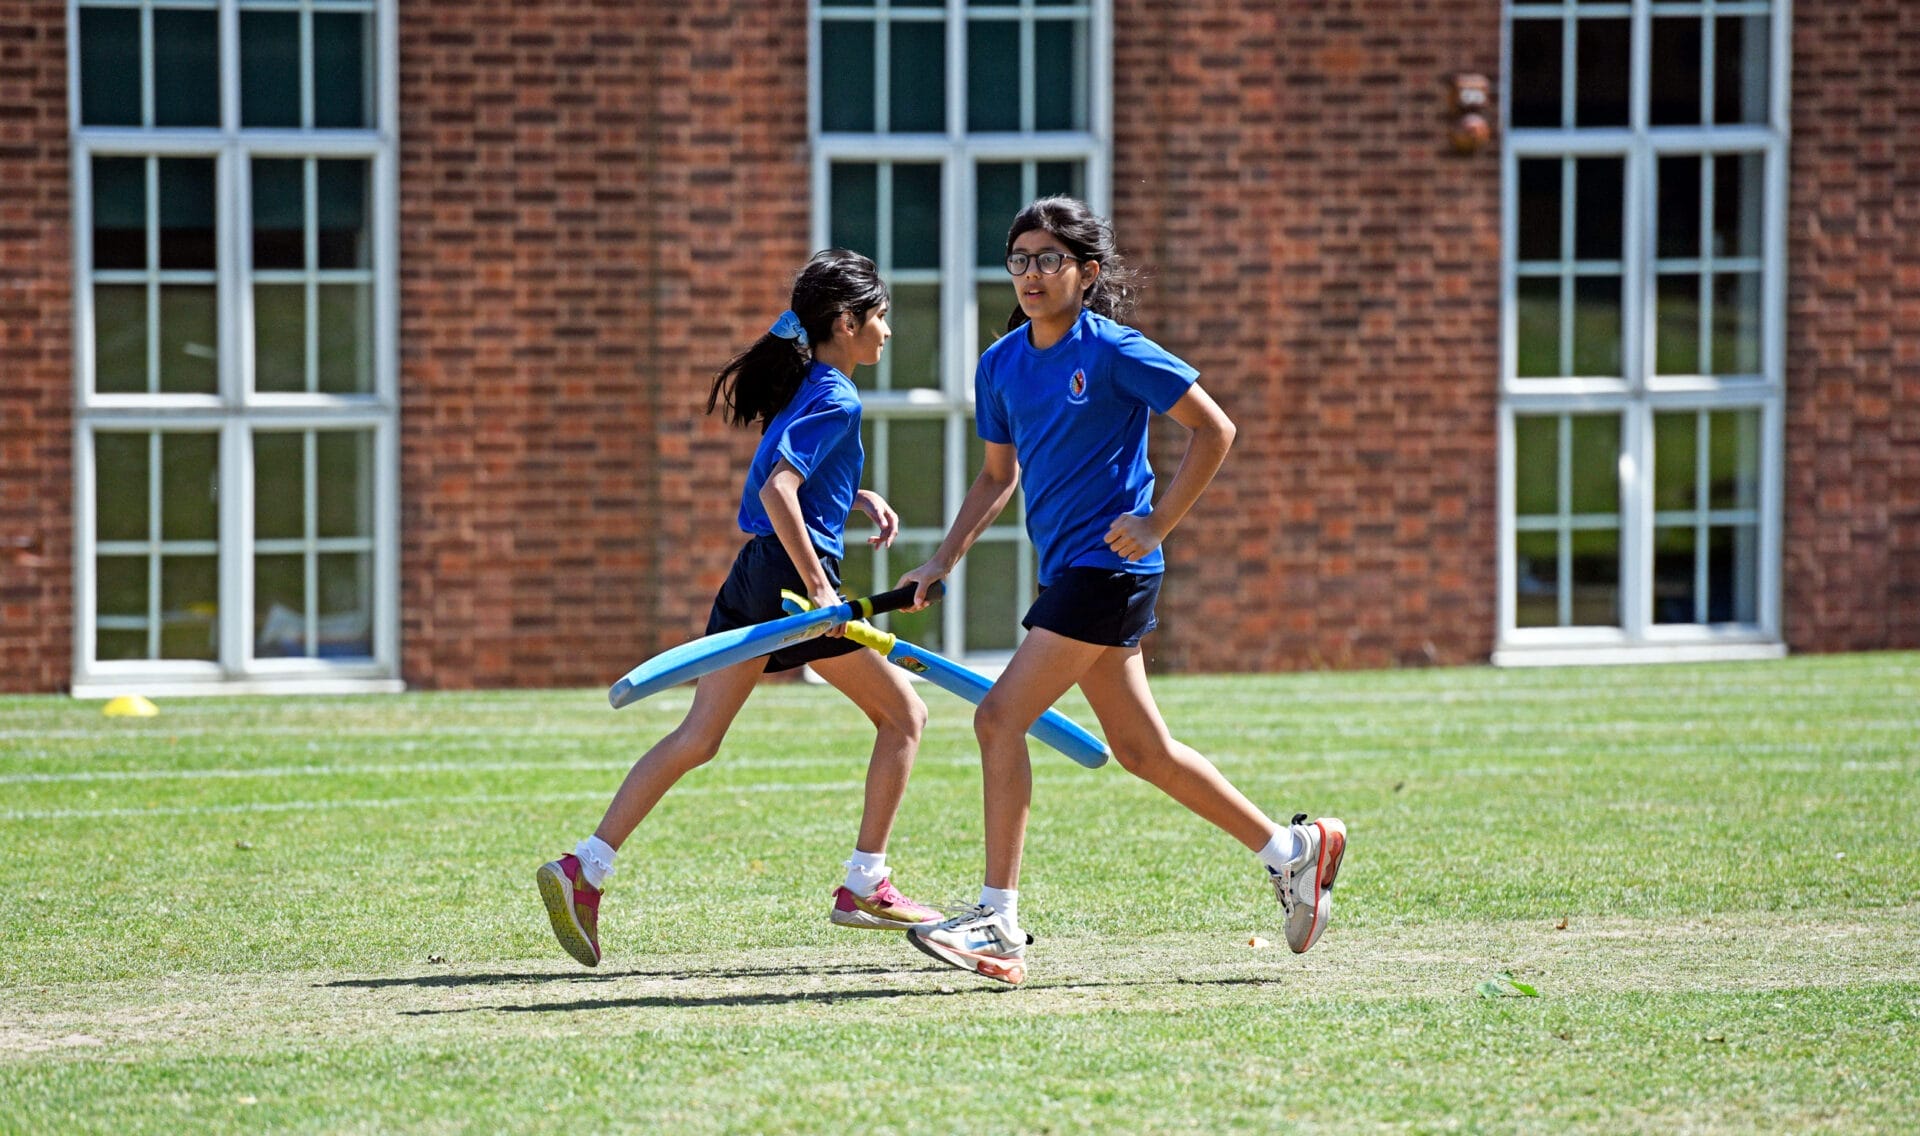 Two girls in blue t-shirts run between the wickets in a House cricket match.